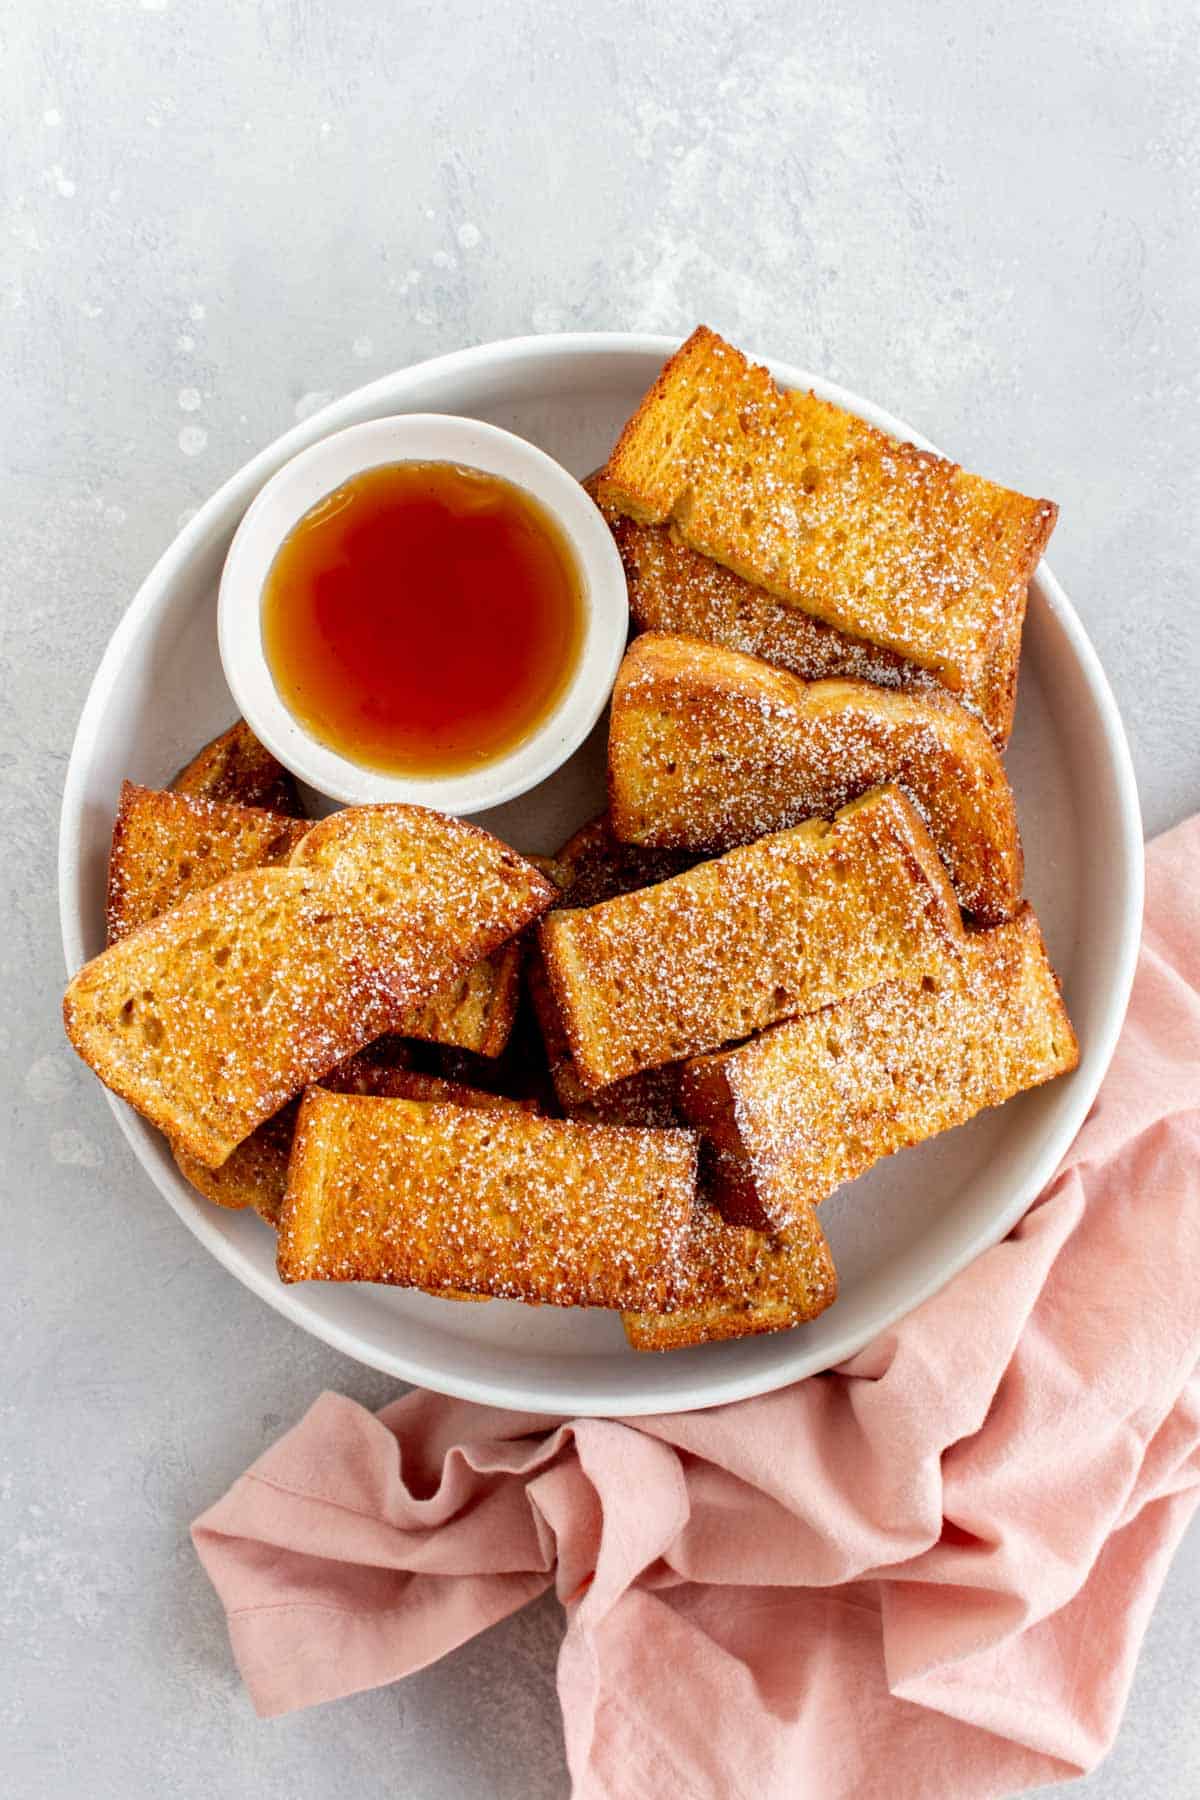 A plate of air fryer french toast sticks with powdered sugar dusted on top.